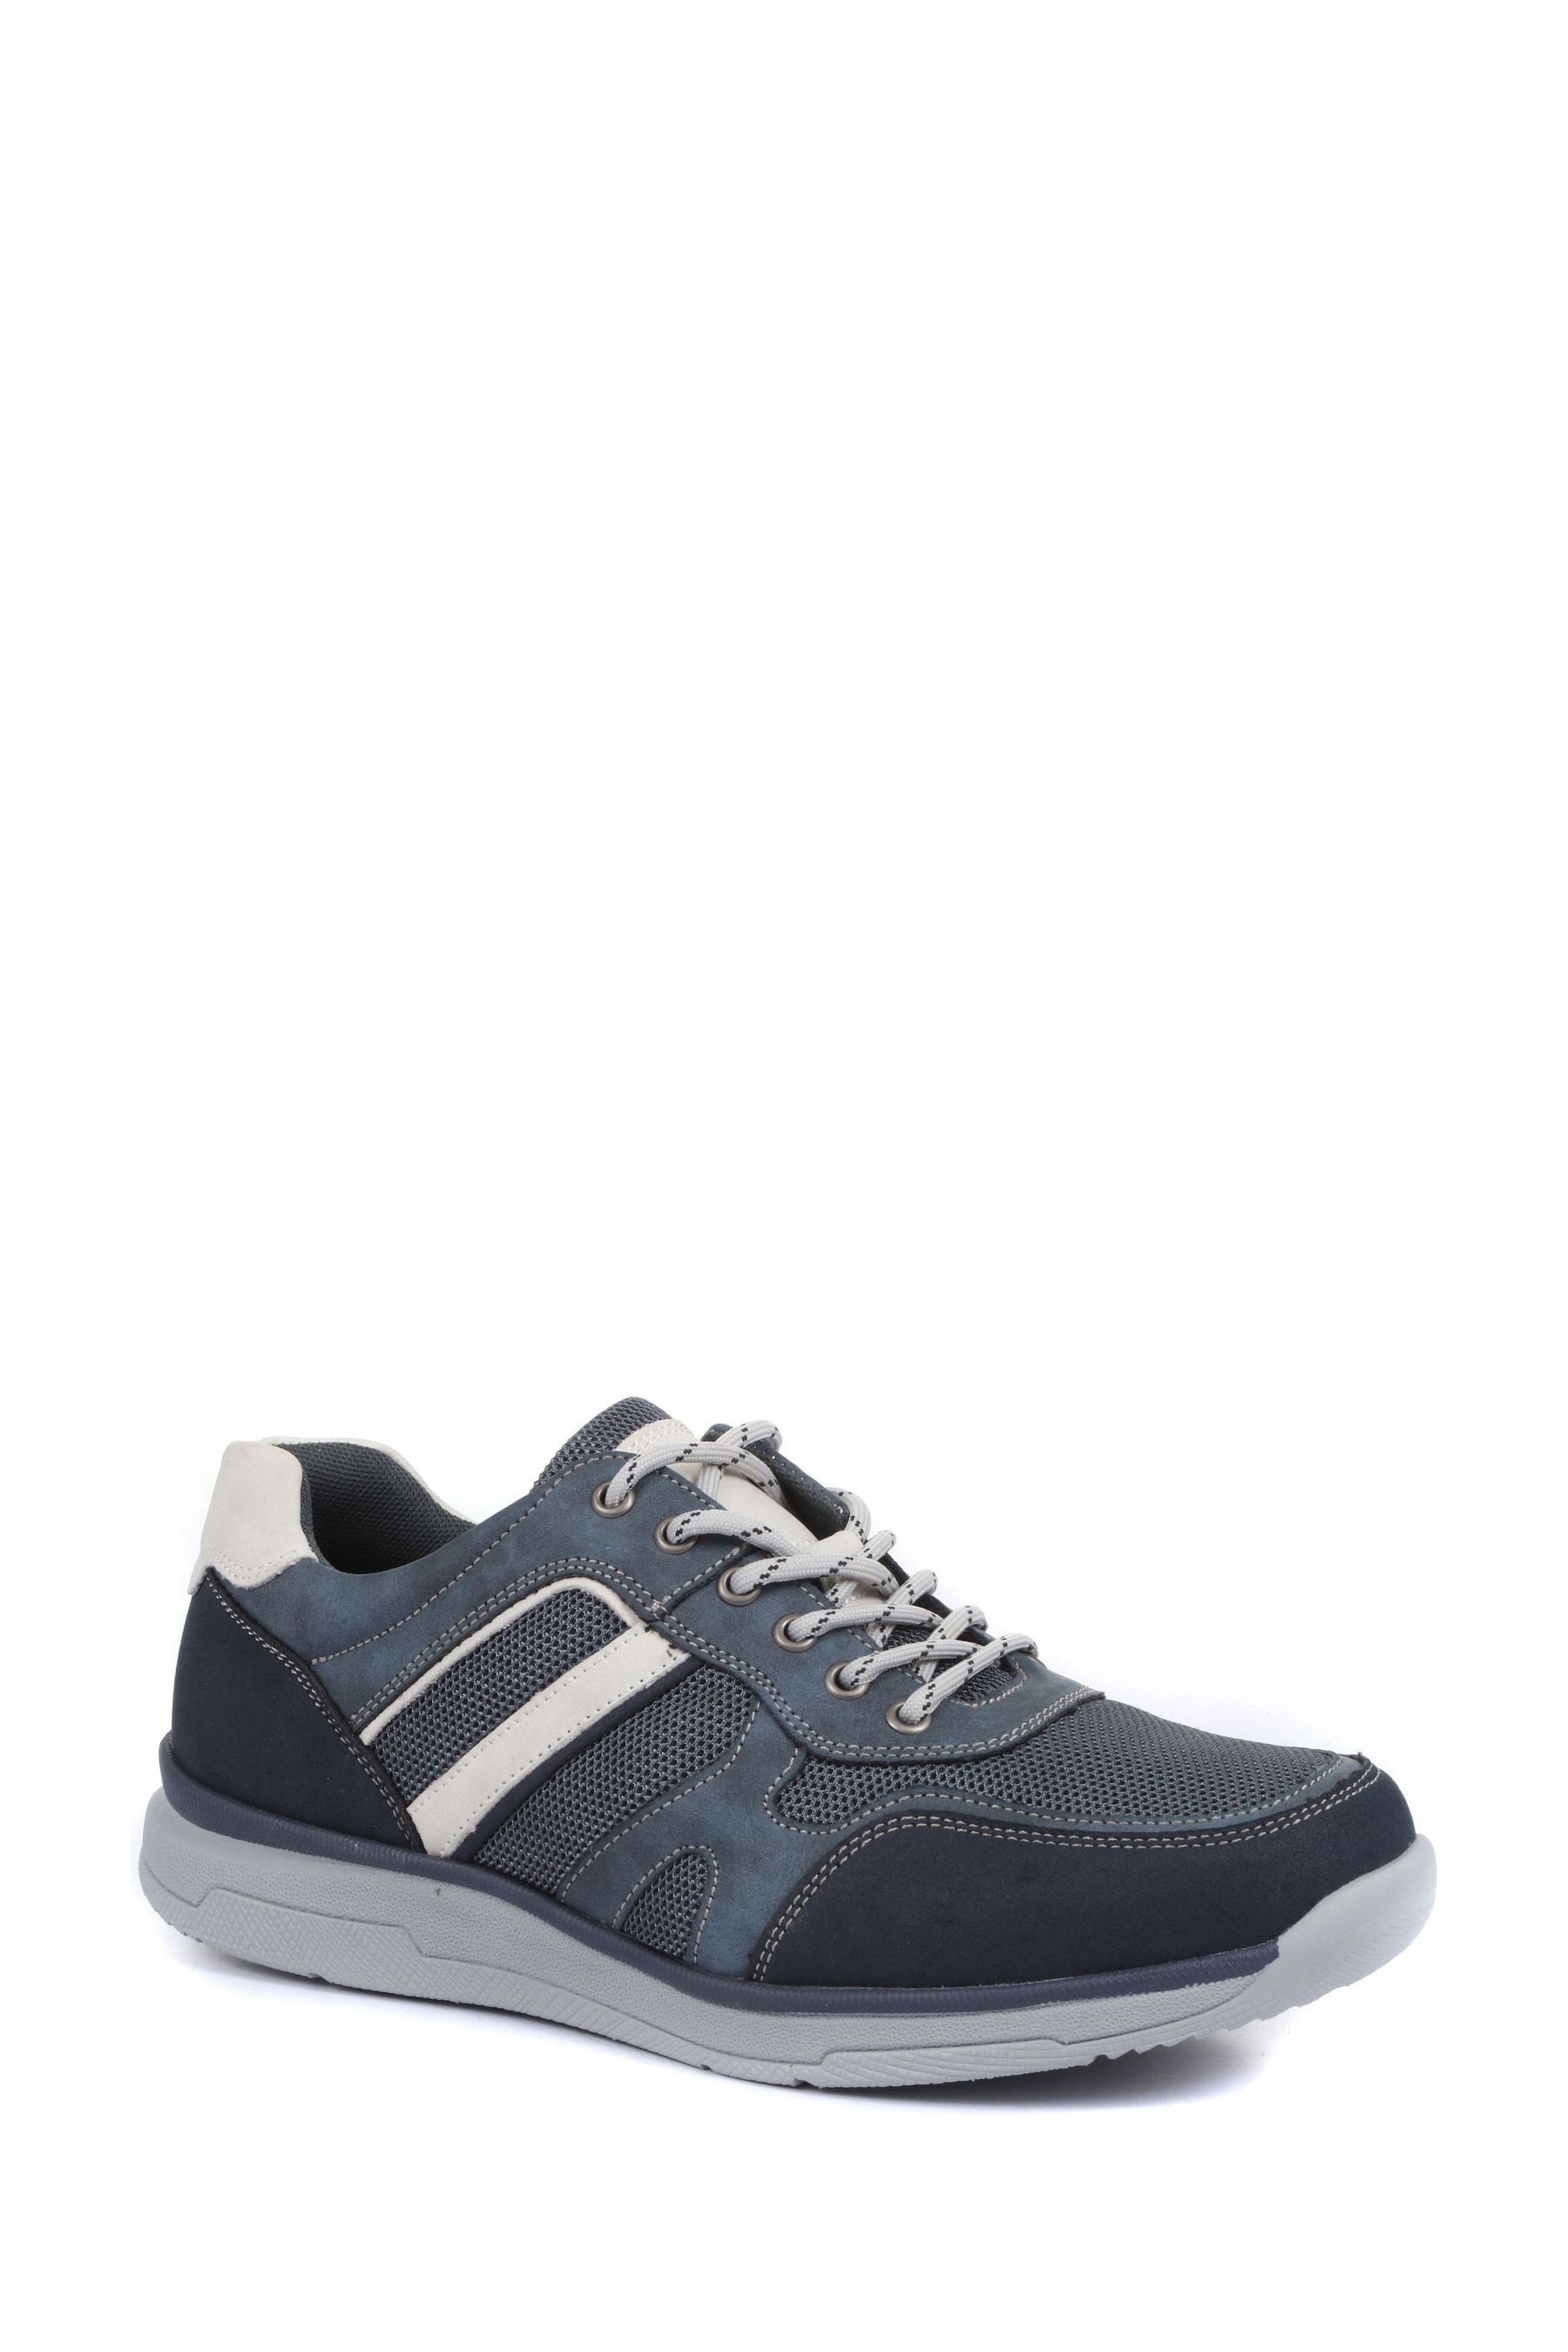 Buy Pavers Mens Wide Fit Trainers from the Next UK online shop